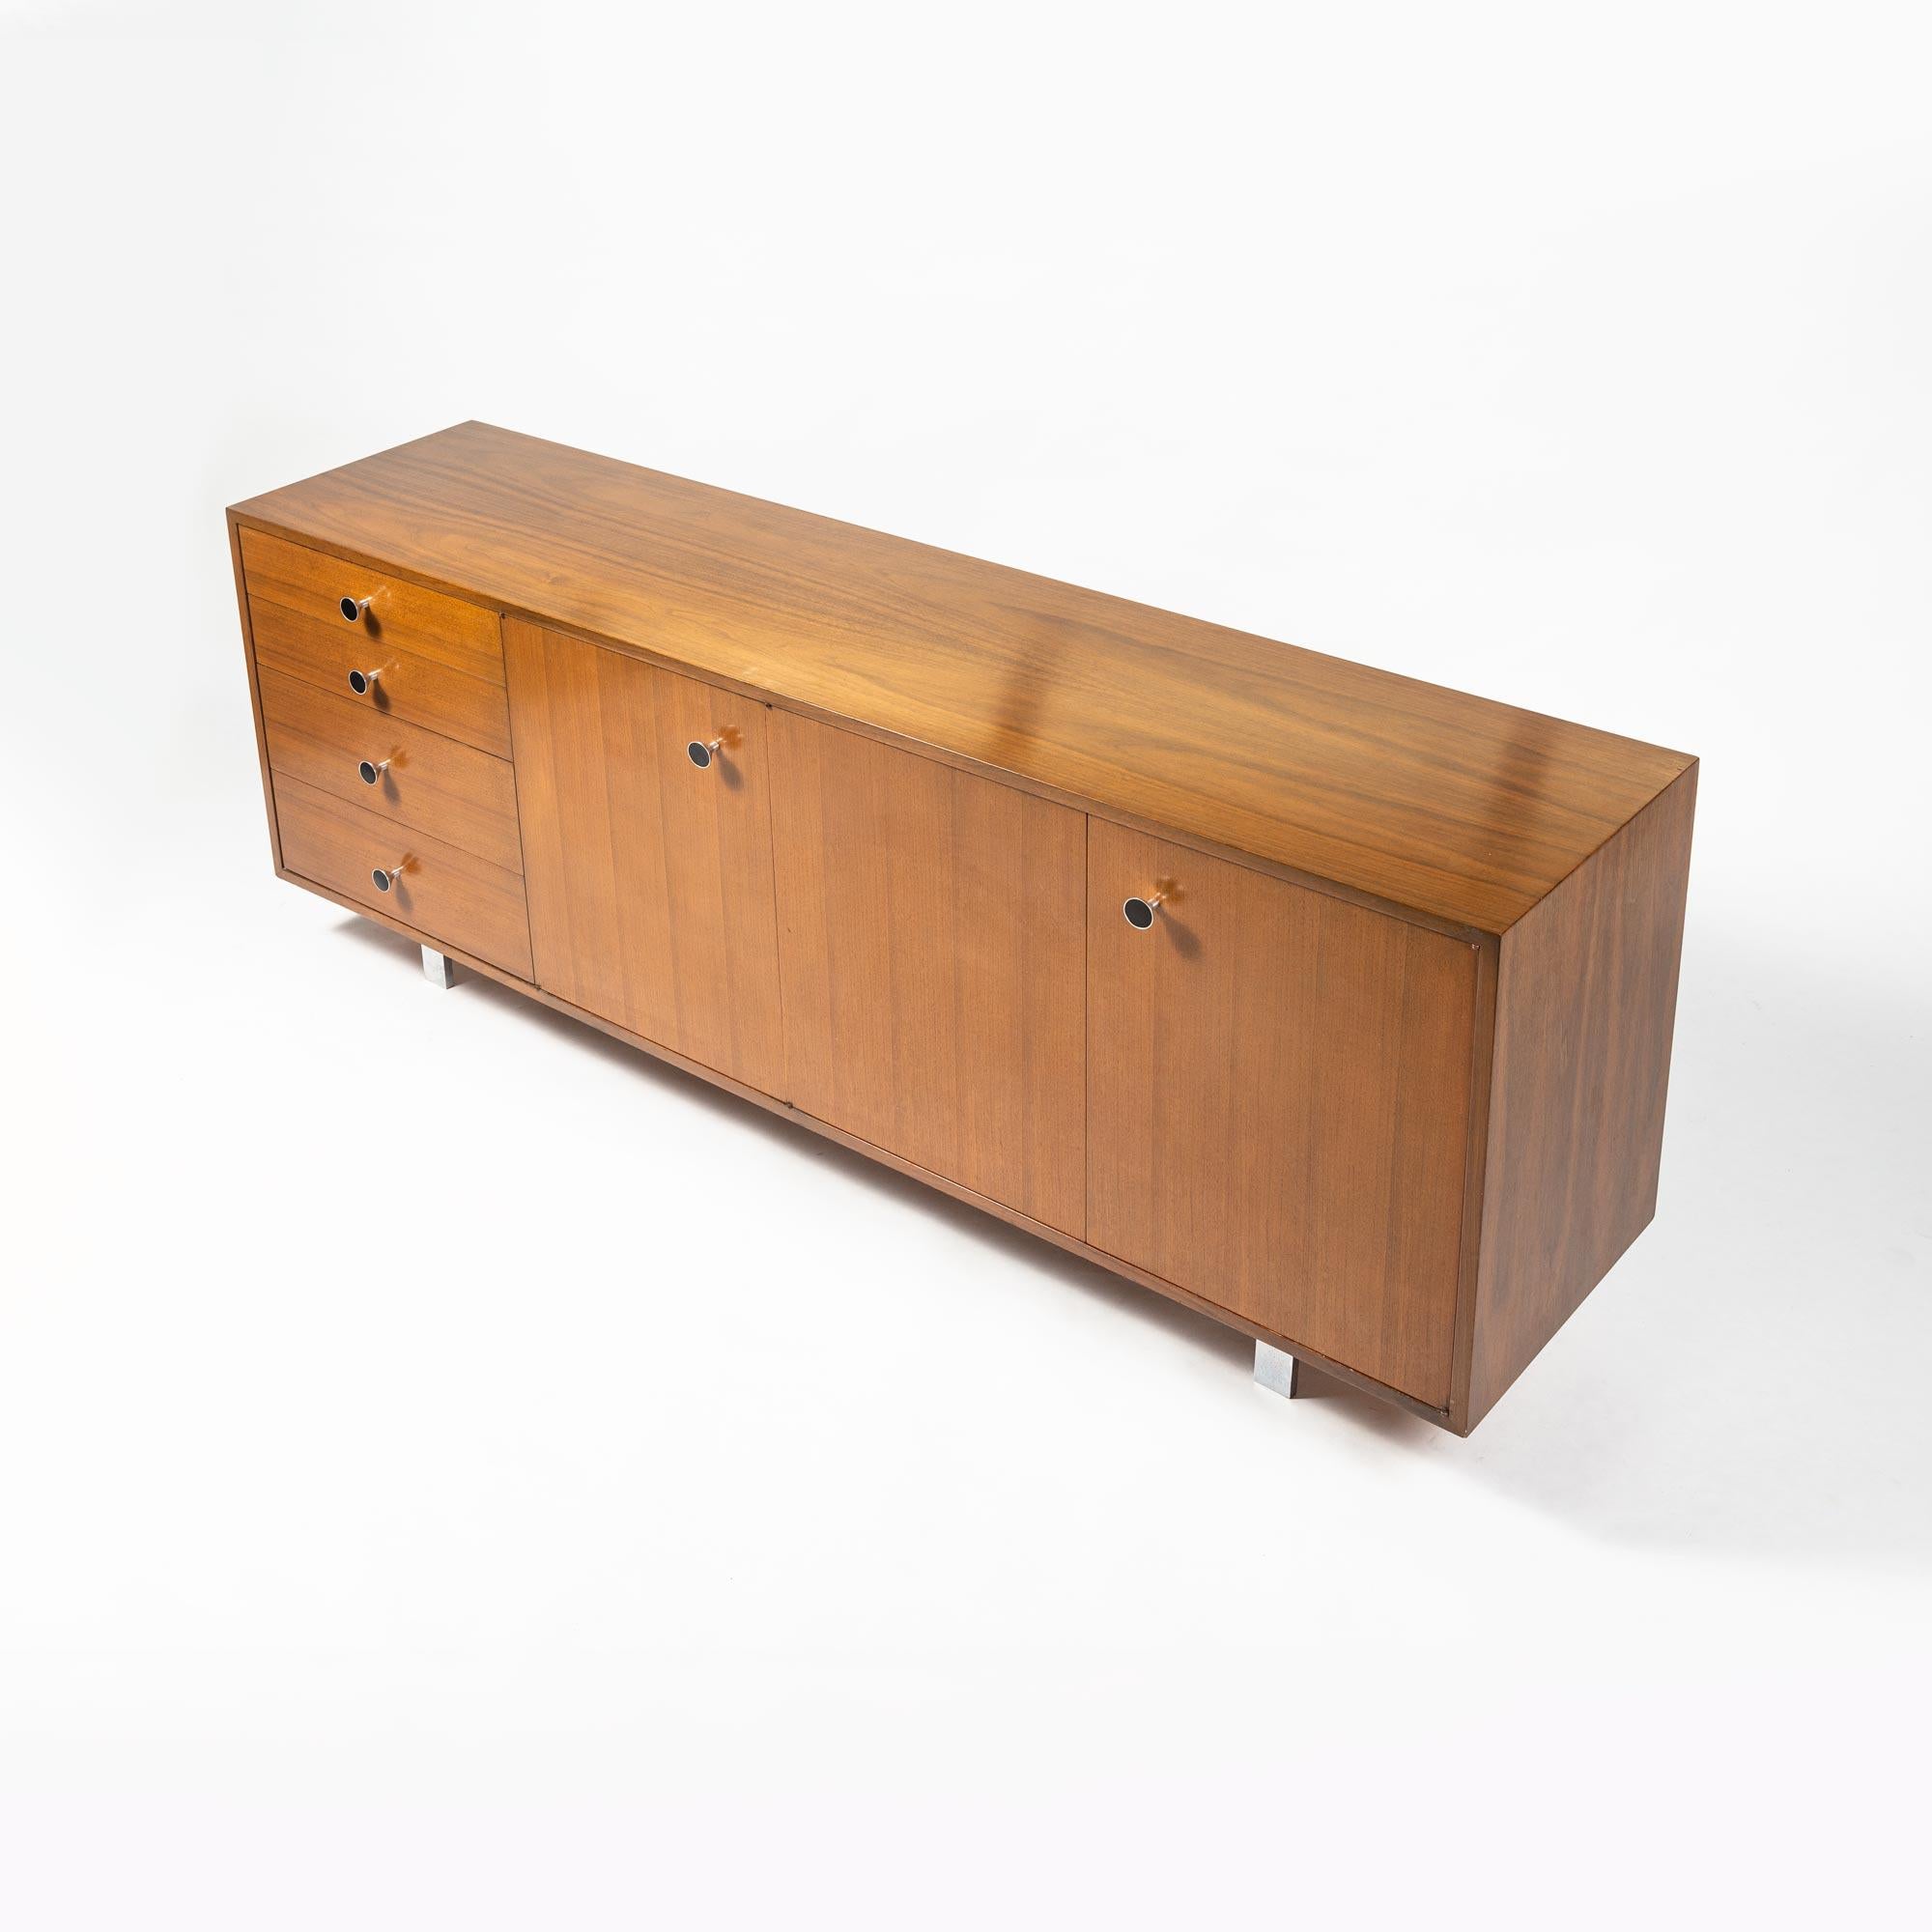 This George Nelson special-order cabinet from Herman Miller that has several custom features including a cork-lined pull-out for glassware, slits for cookie sheet storage, a pull-out butcher's block cutting board, and double drawers, all in great